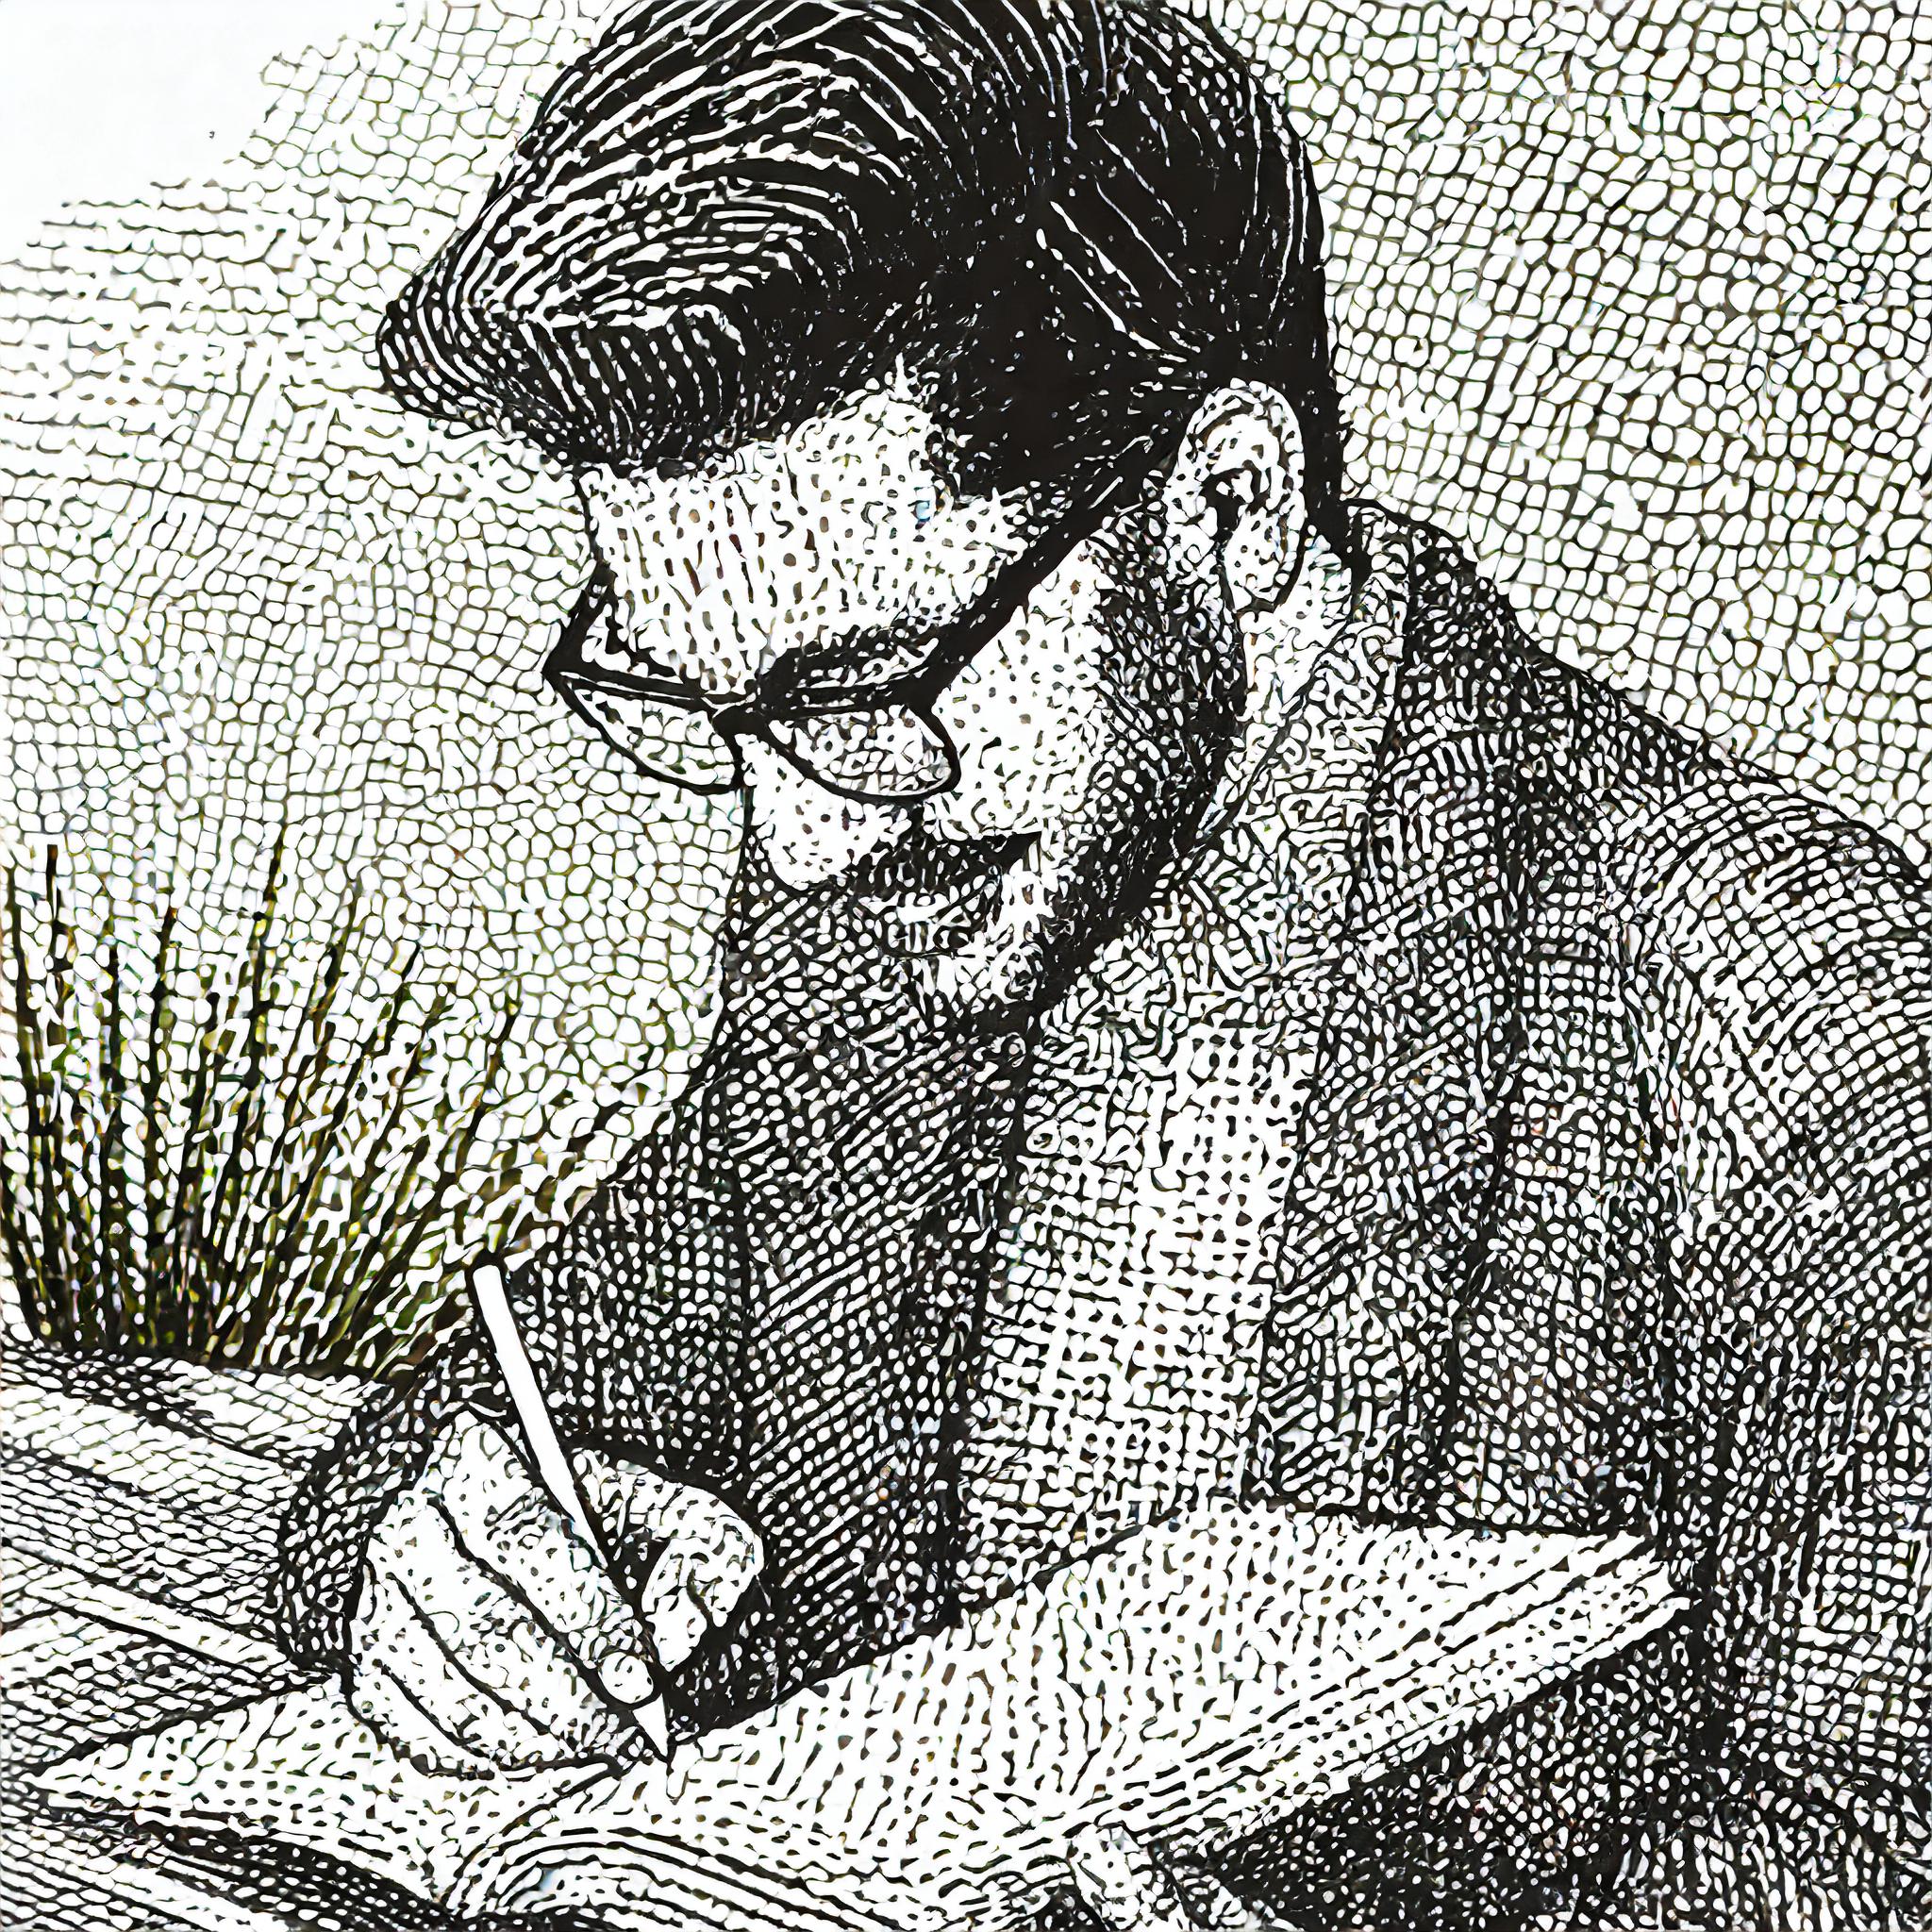 man writing in notebook